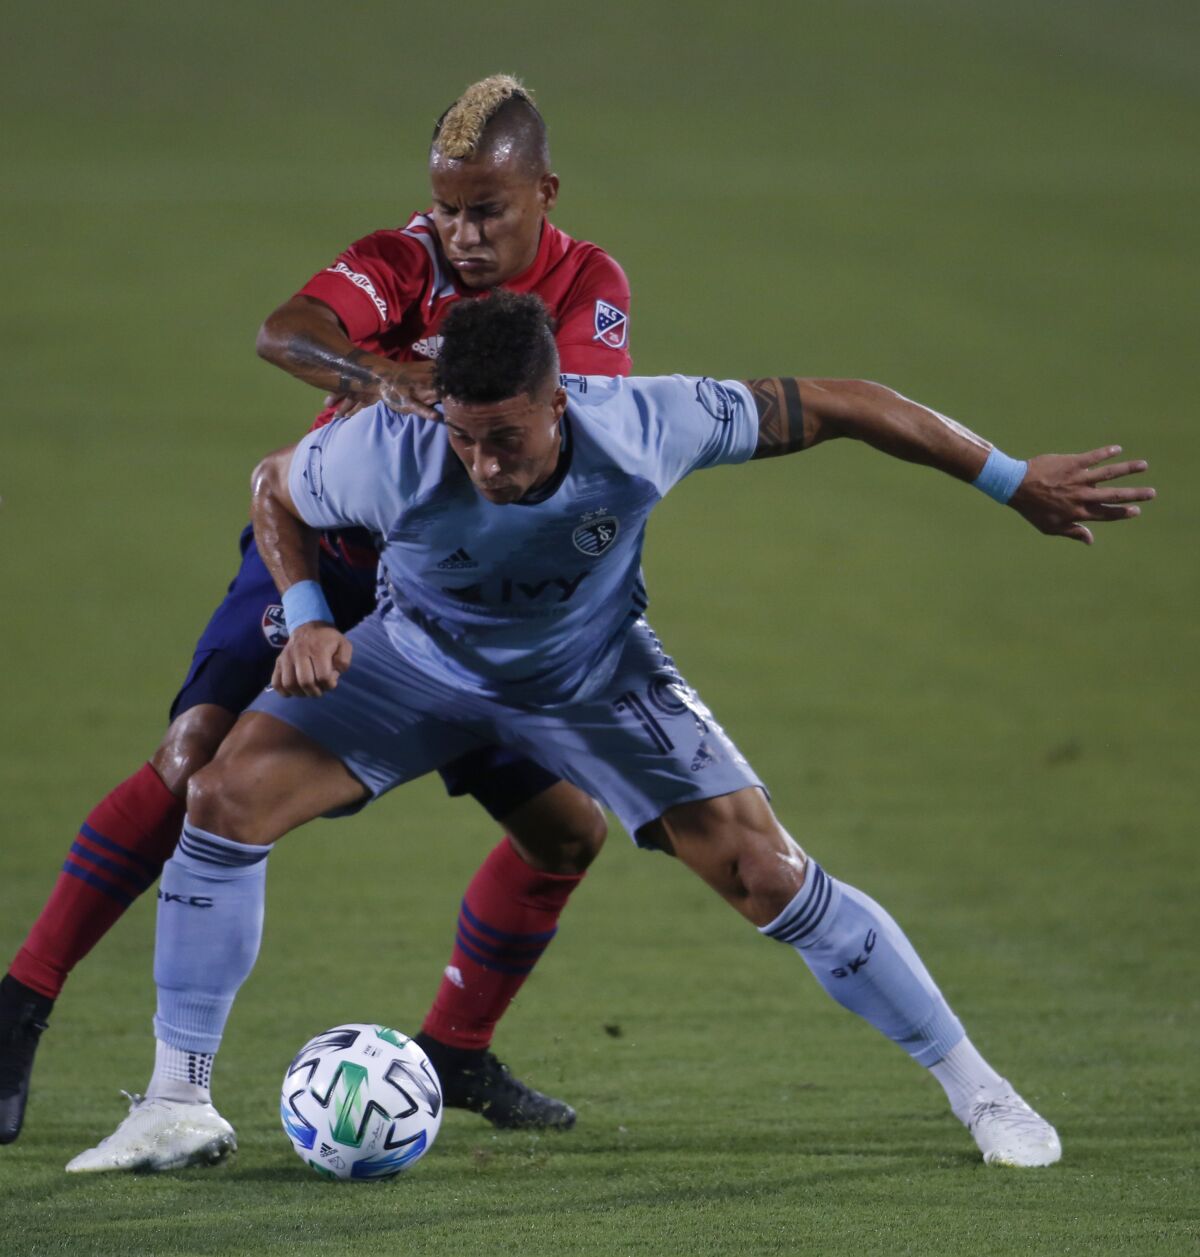 Sporting KC's Erik Hurtado, front, shields the ball from FC Dallas' Michael Barriosduring the first half of an MLS soccer game in Frisco, Texas, Wednesday, Oct. 14, 2020. (Steve Hamm/The Dallas Morning News via AP)